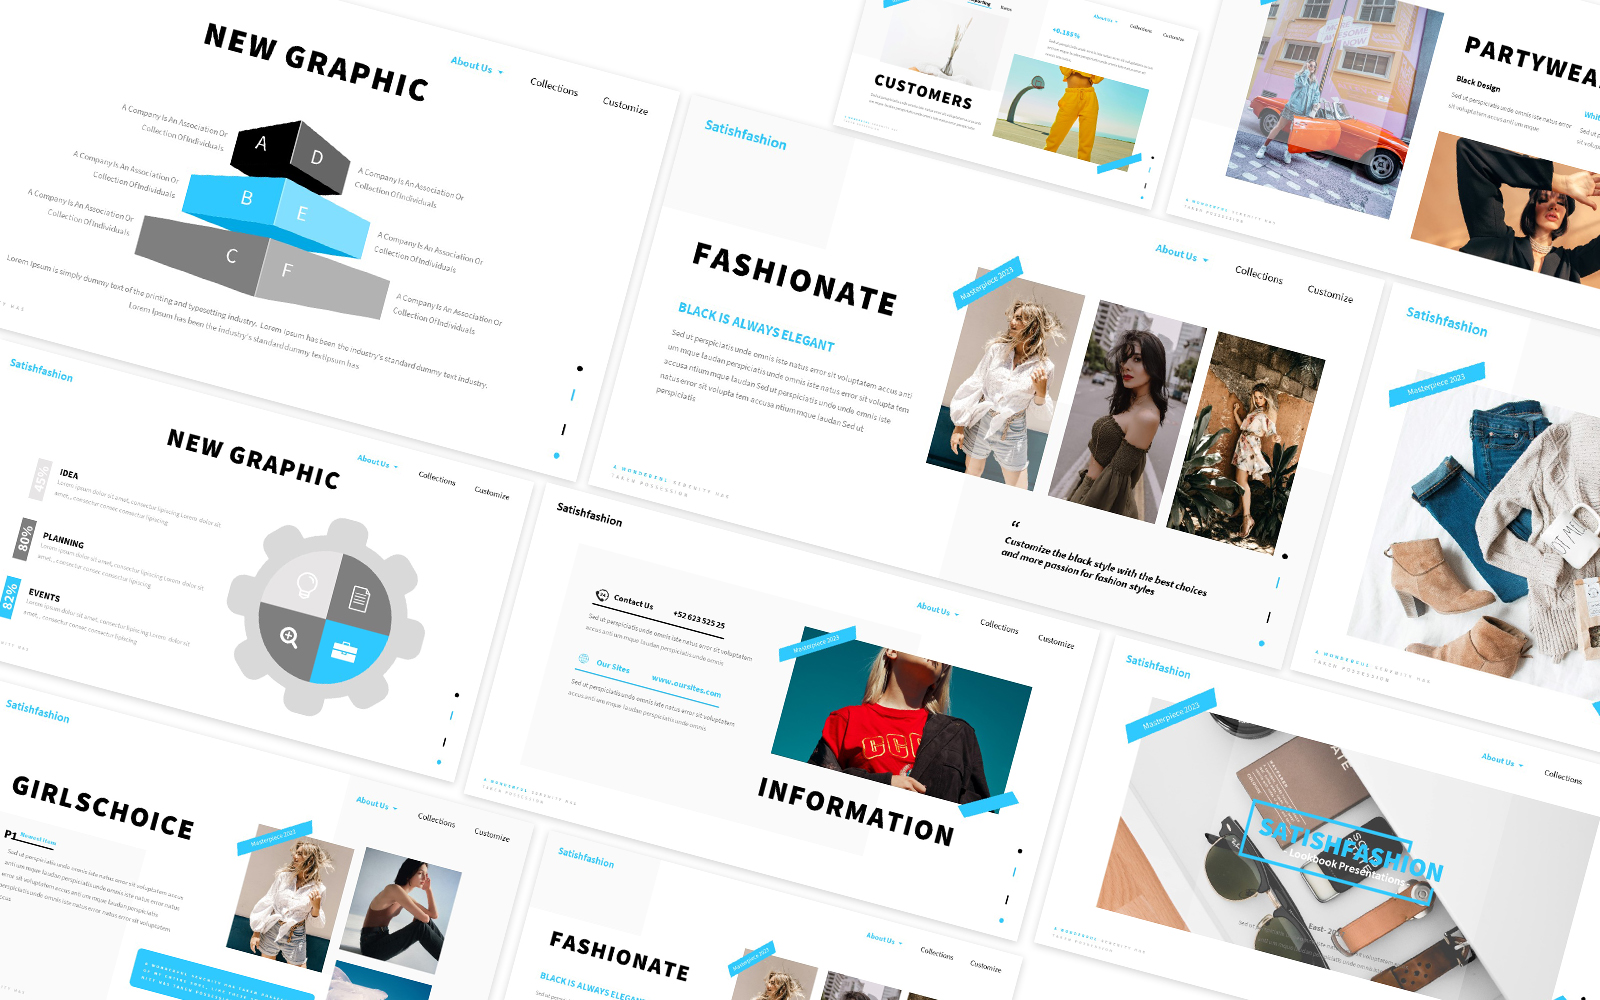 Satisfashion Company Powerpoint Template